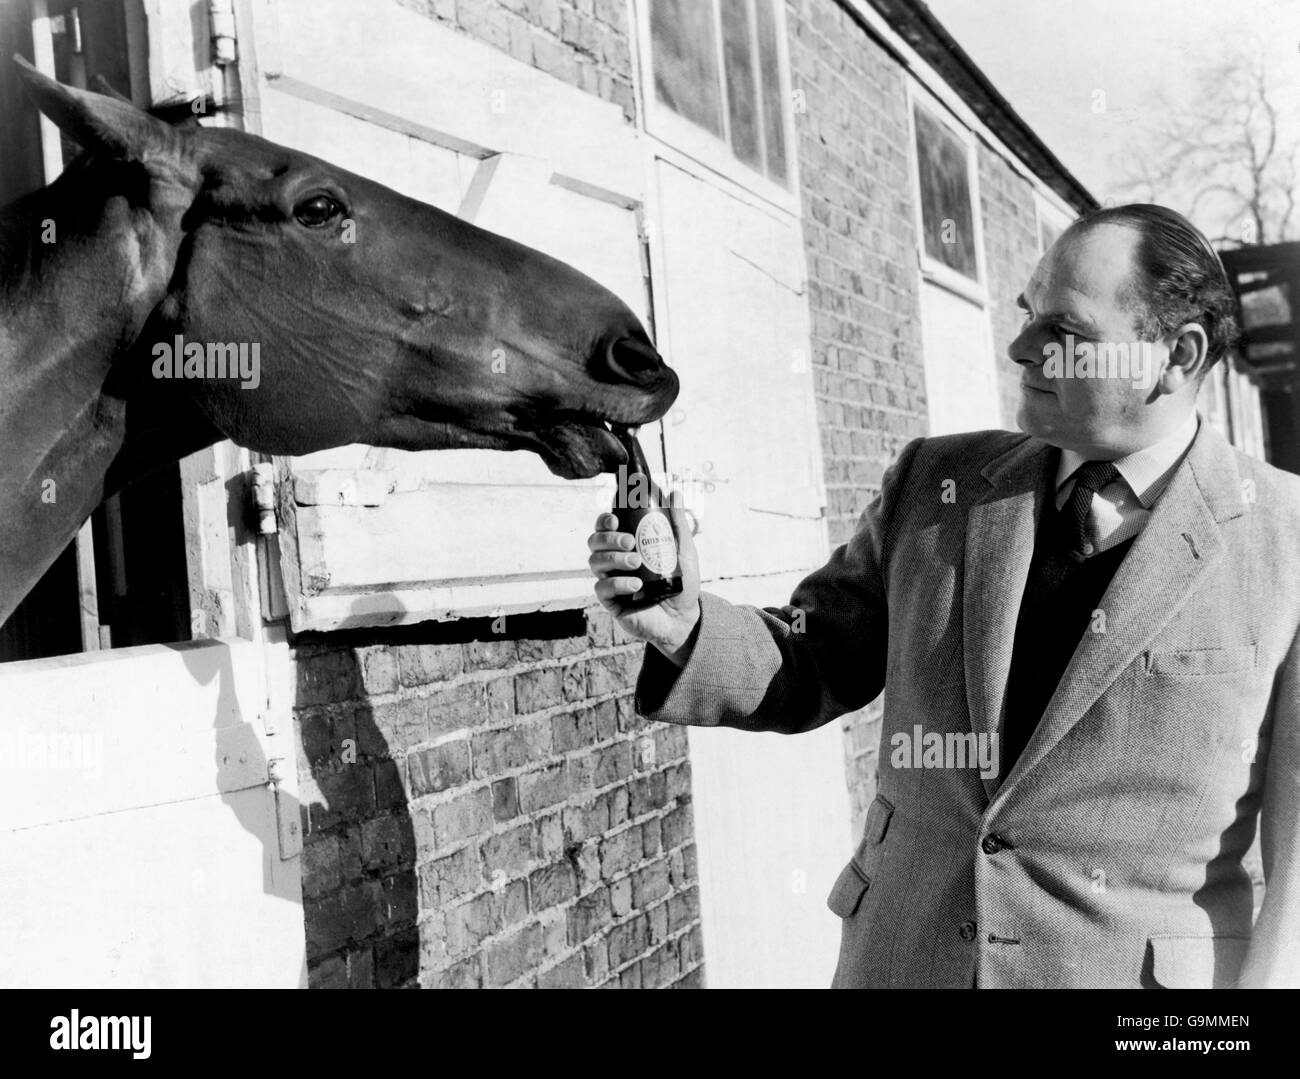 Arkle slurps on one of his twice-daily bottles of Guinness, proffered to him by Henry Hyde (r), Managing Director of Kempton Park Stock Photo